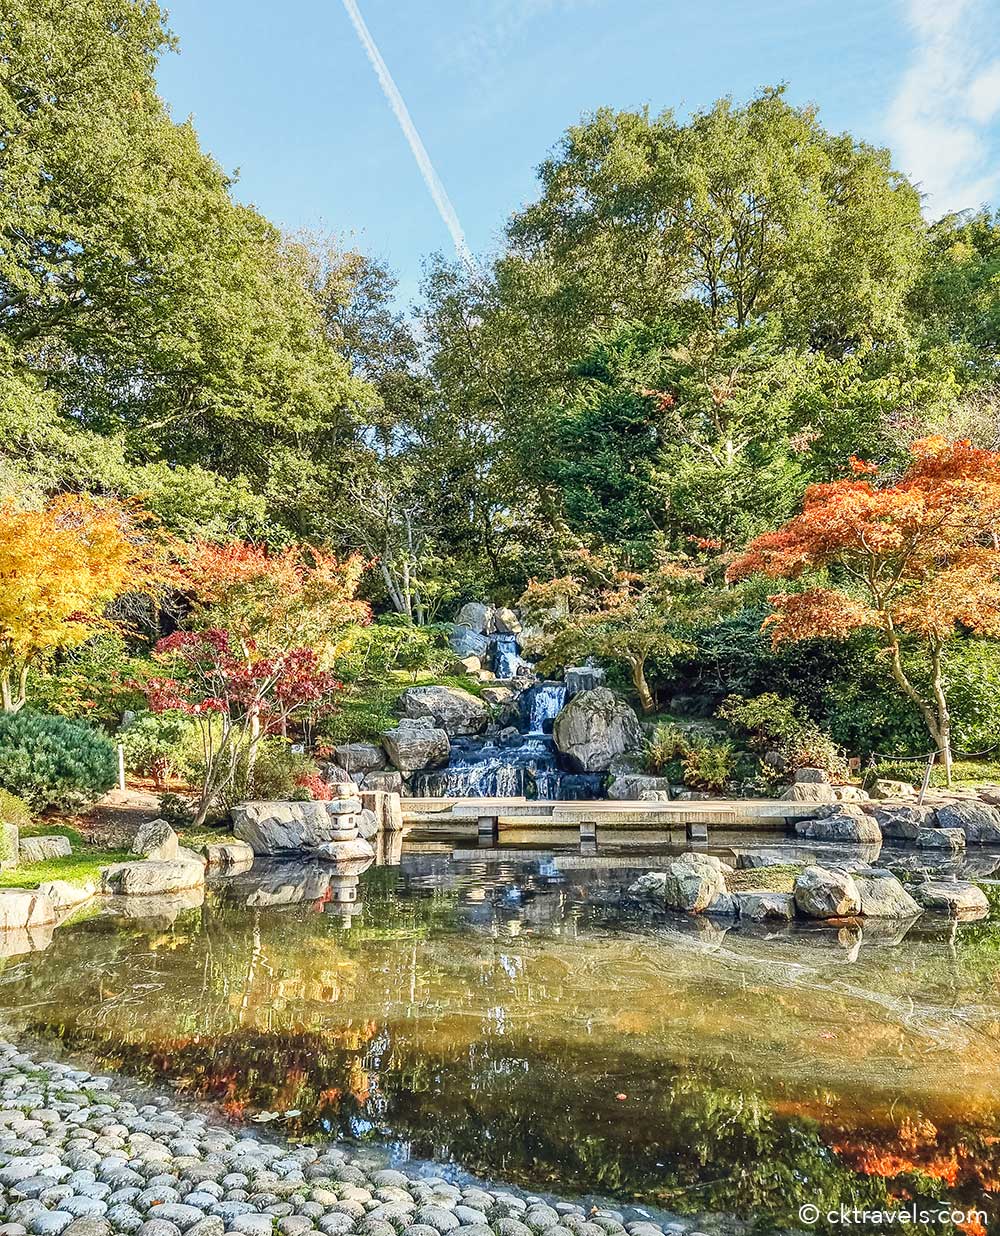 Holland Park and Kyoto Gardens first London date